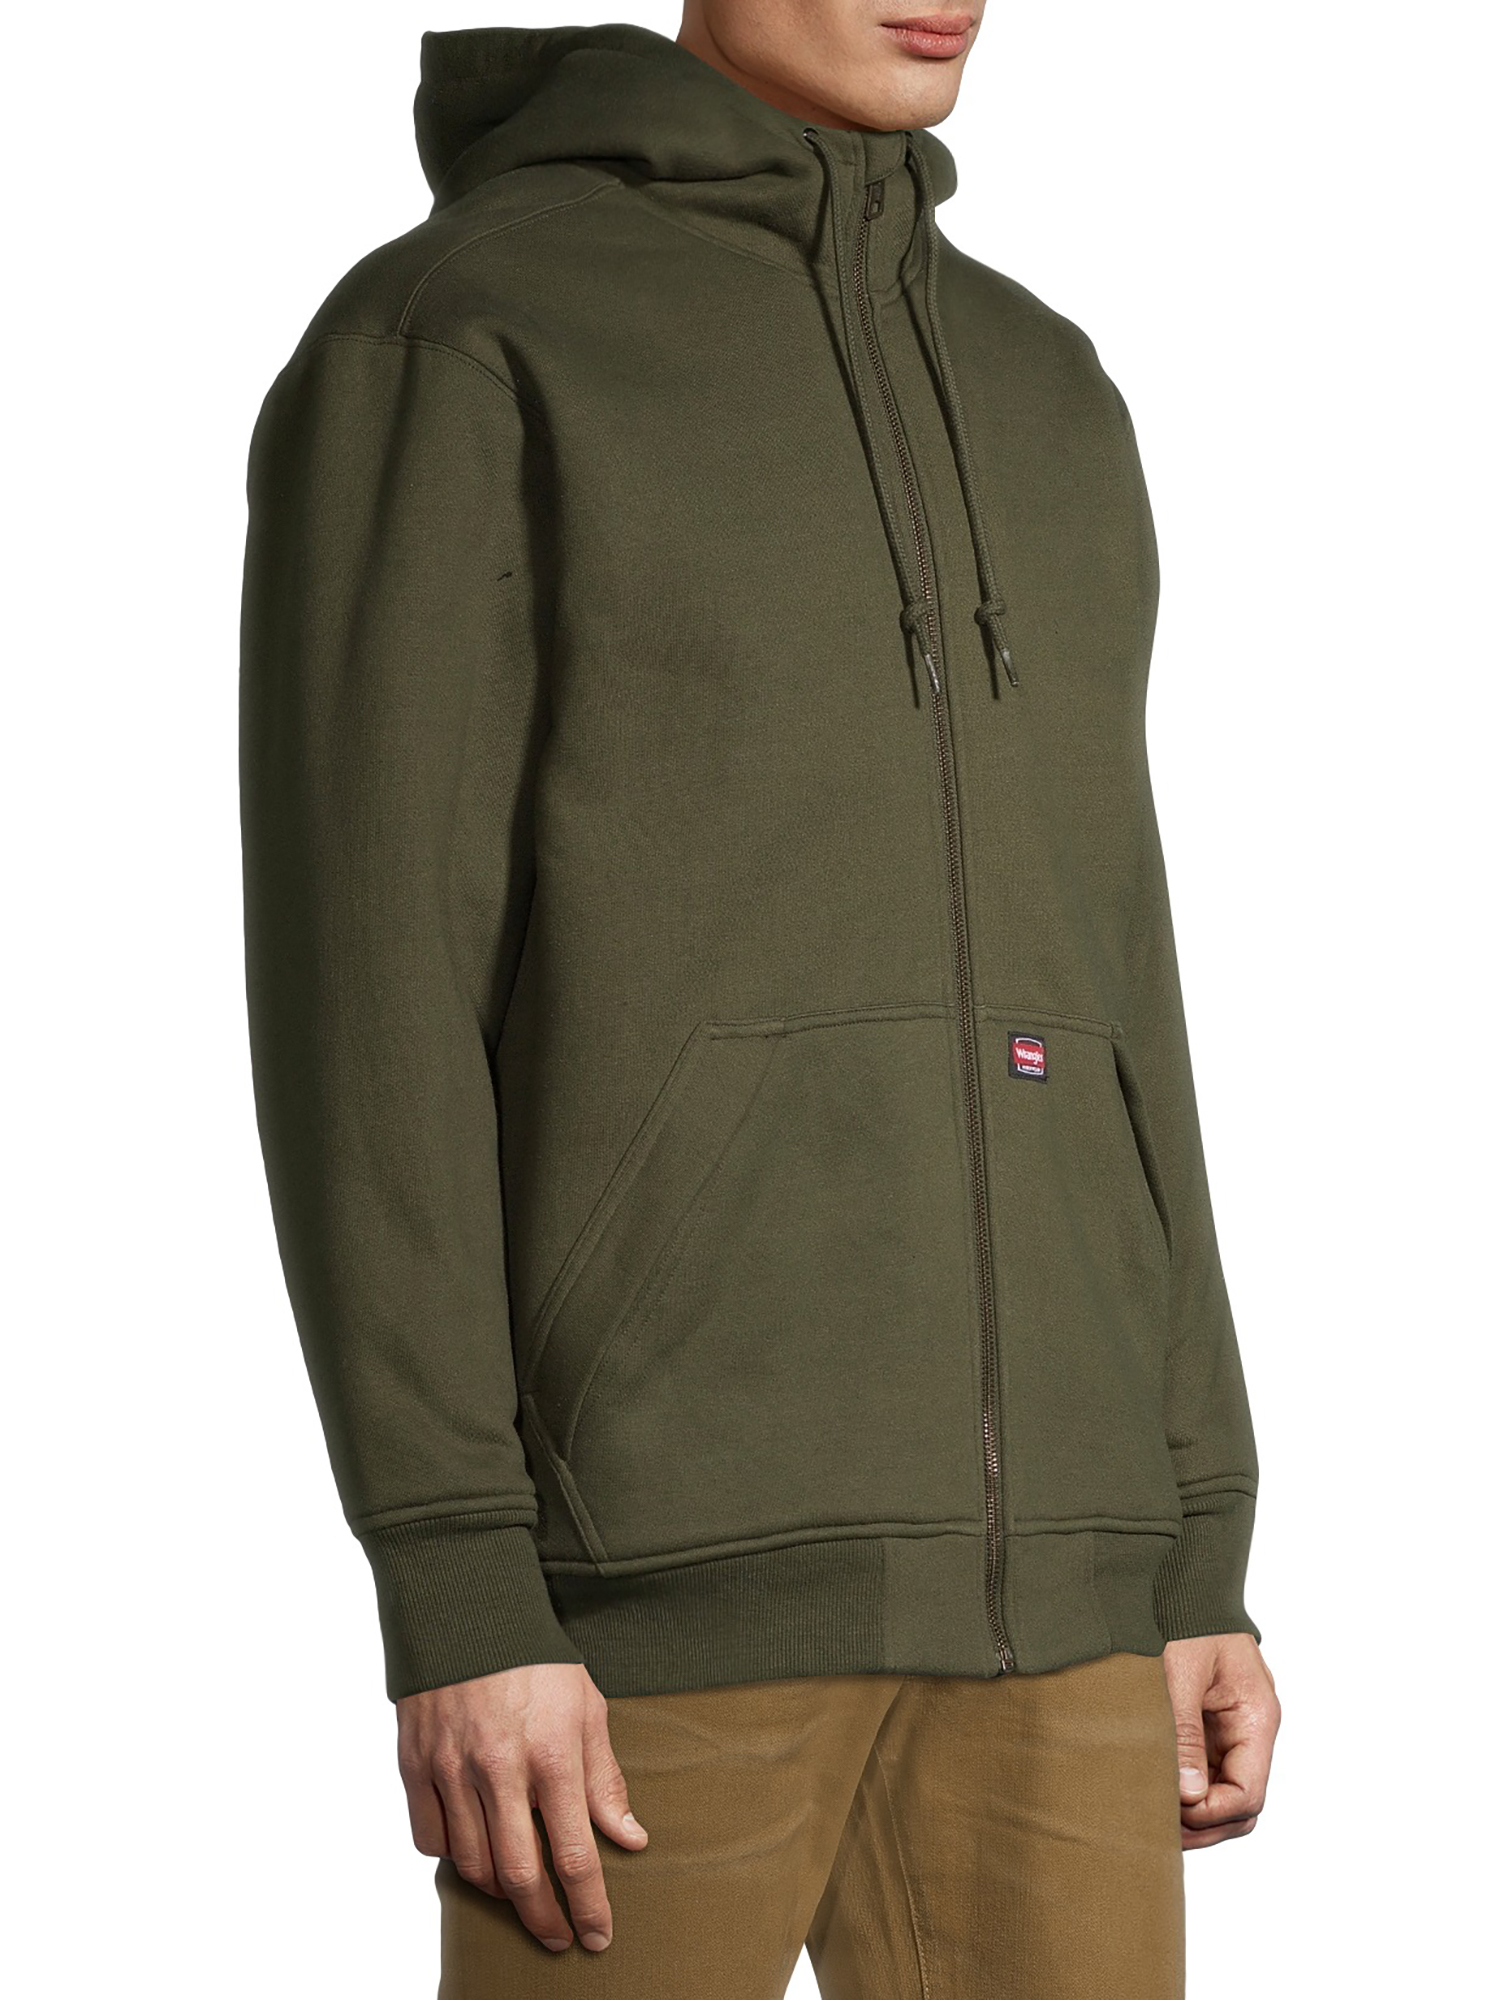 Wrangler Workwear Men's Guardian Heavy Weight Faux Sherpa and Quilt Lined Hoodie - image 4 of 6